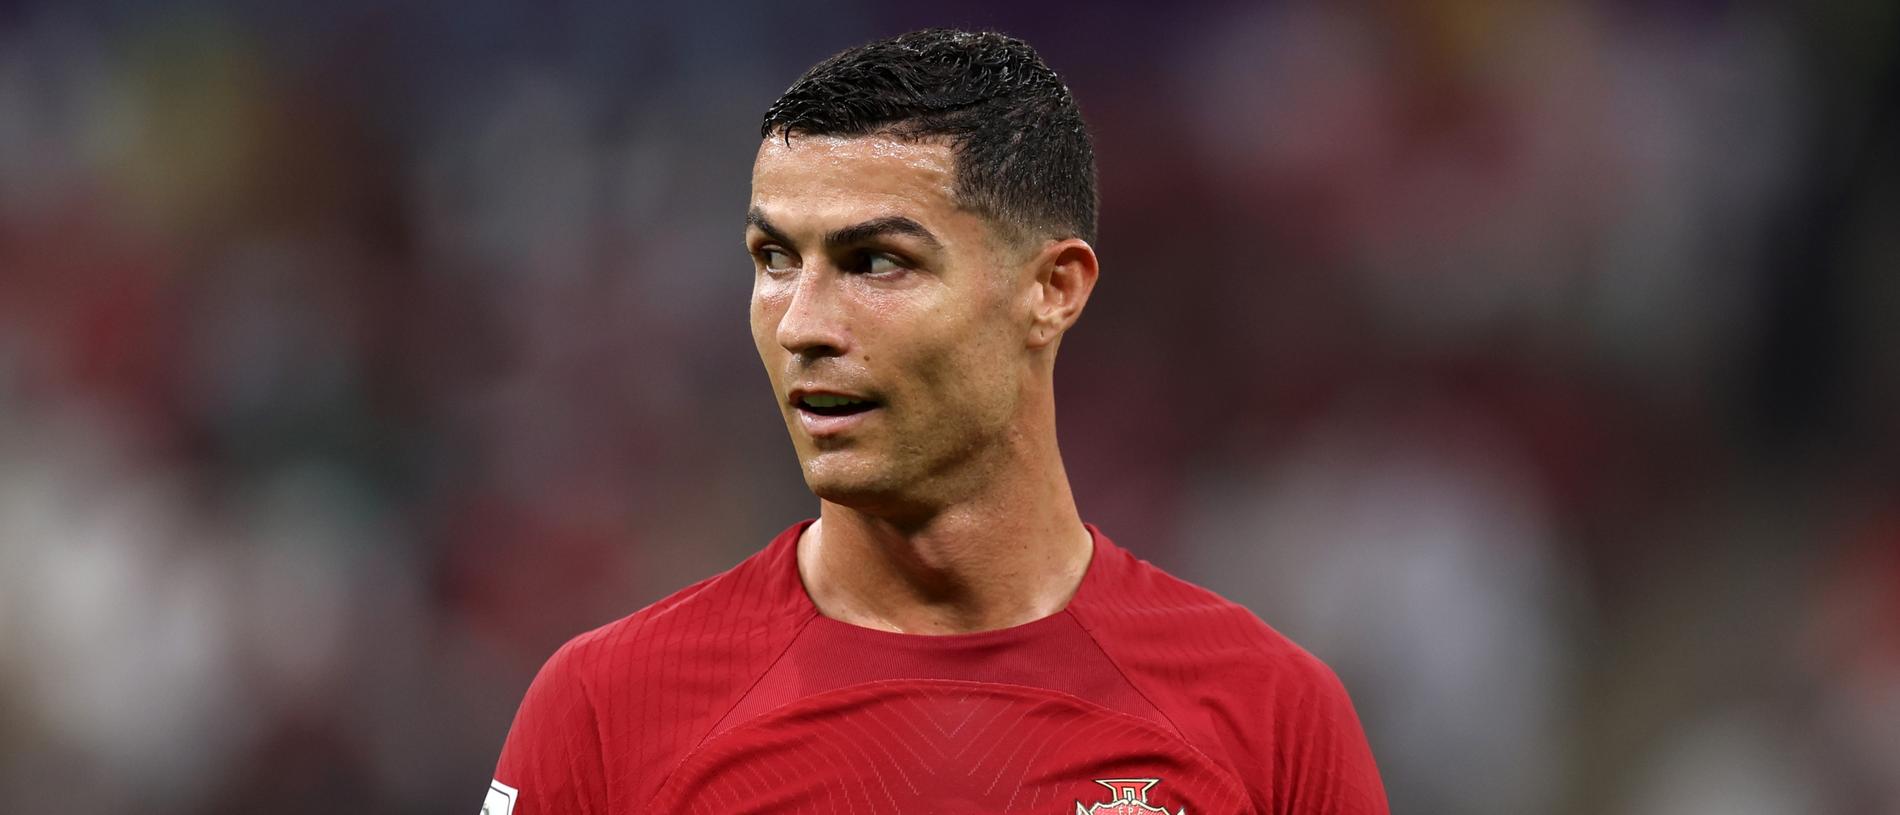 World Cup: Cristiano Ronaldo shrugs off Man United exit as he nets  Portugal's opening goal in Qatar